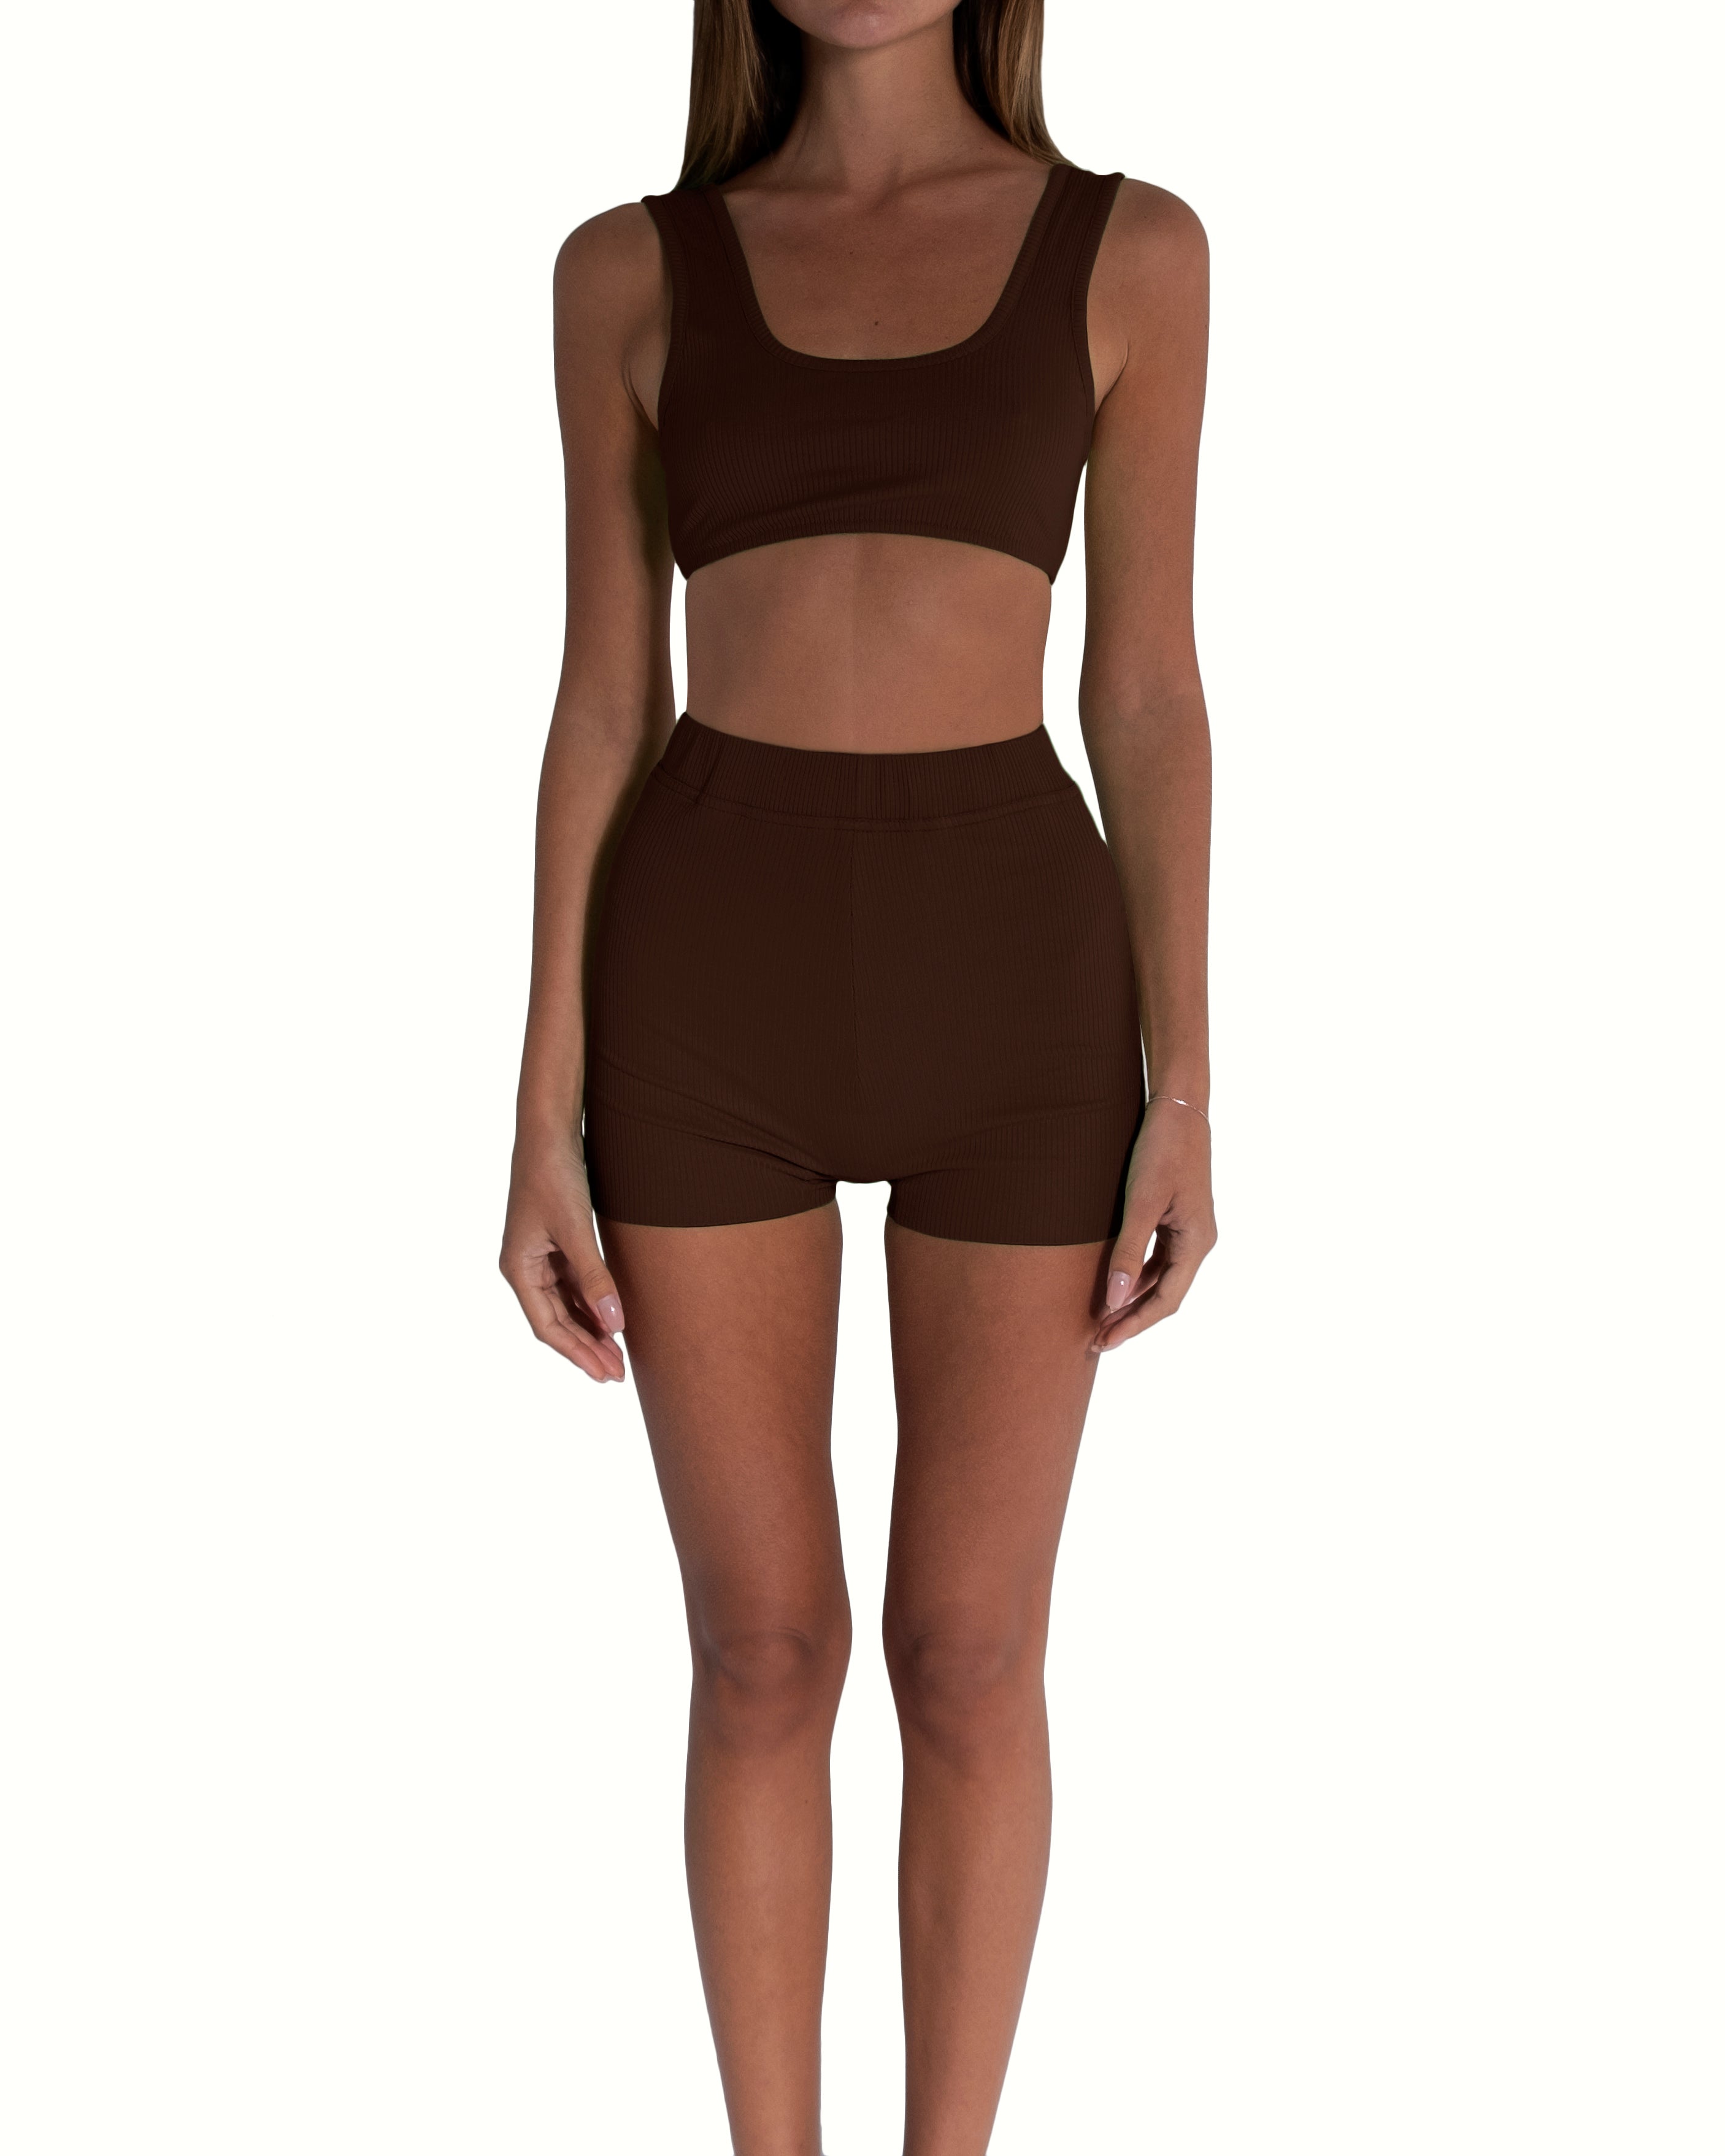 BROWN BOXY BRALETTE AND SHORTS SET